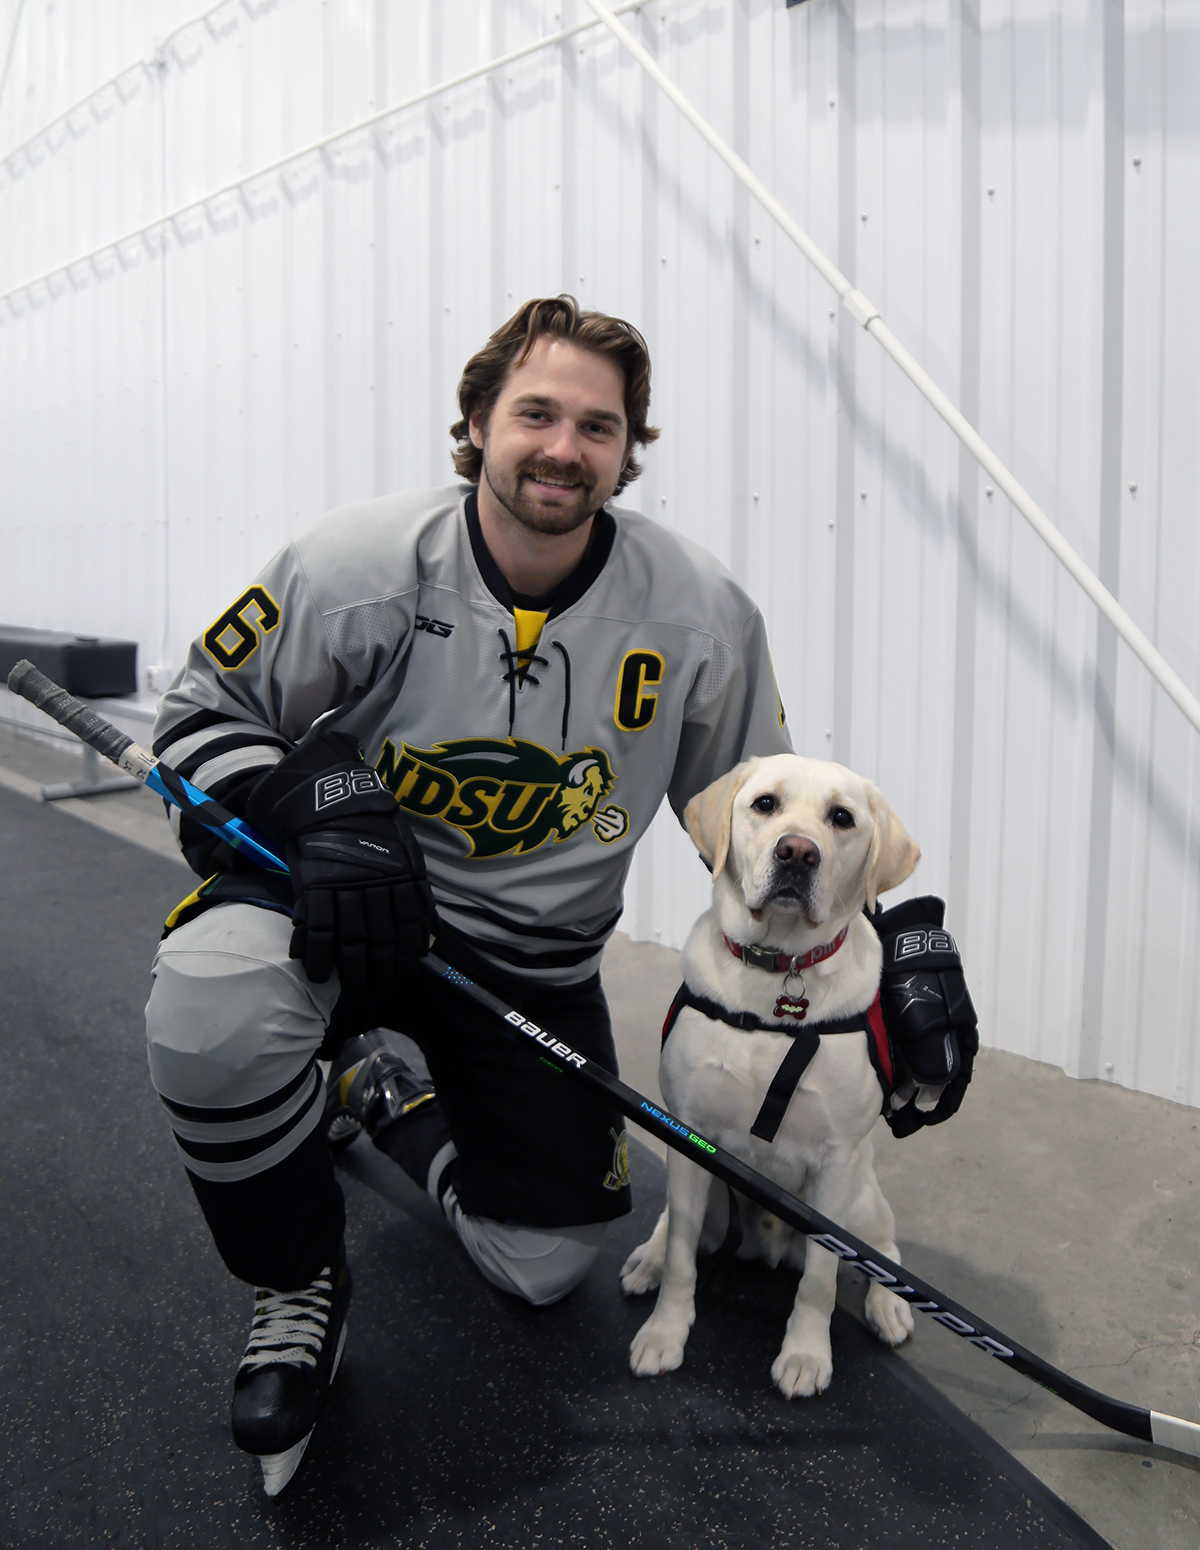 young man in ice skates and hockey uniform that says "NDSU", kneeling in arena next to white service dog